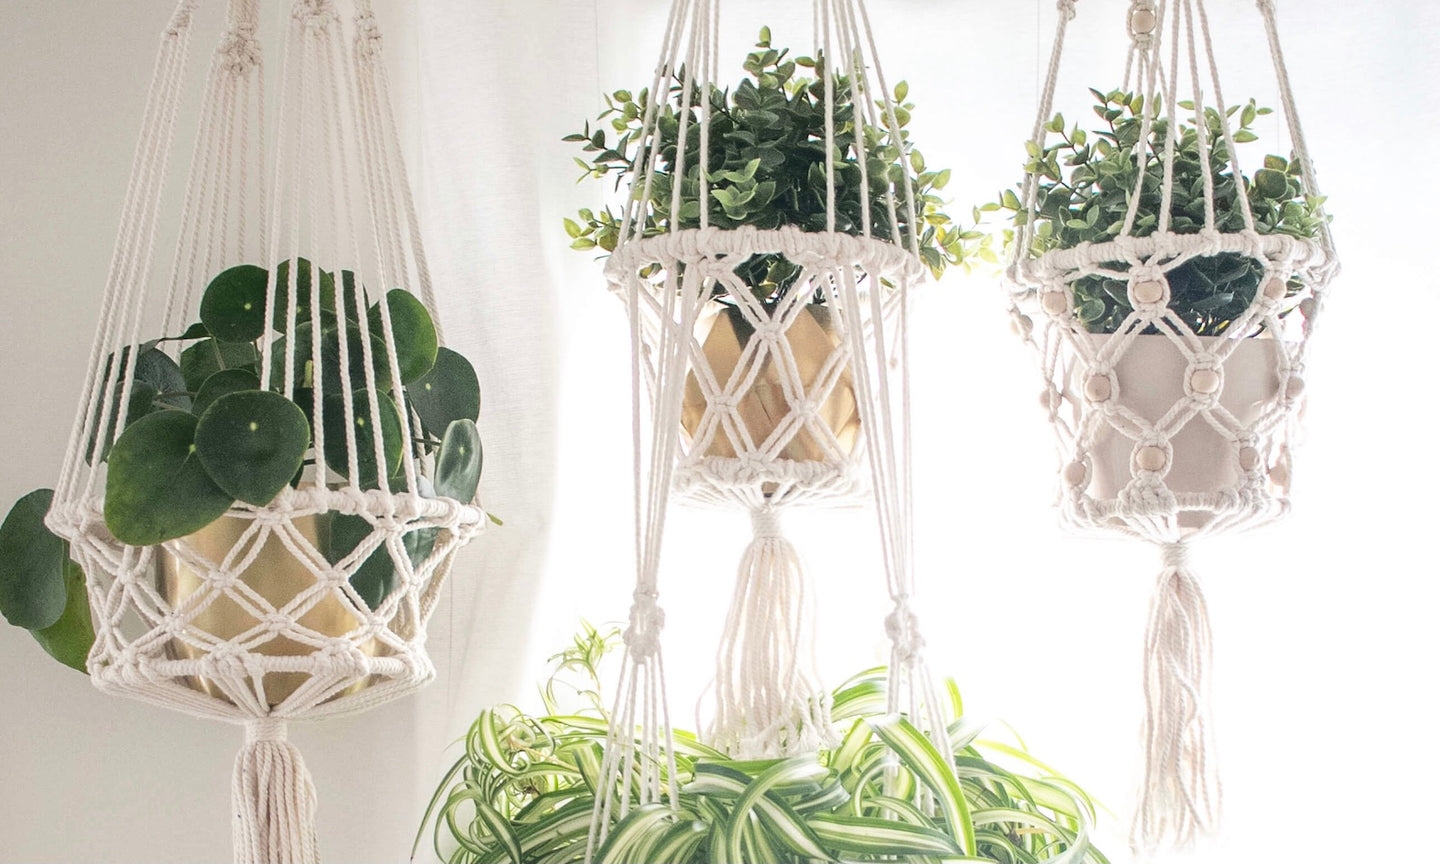 photo of beautiful handmade plant hangers holding lush plants in light-filled room